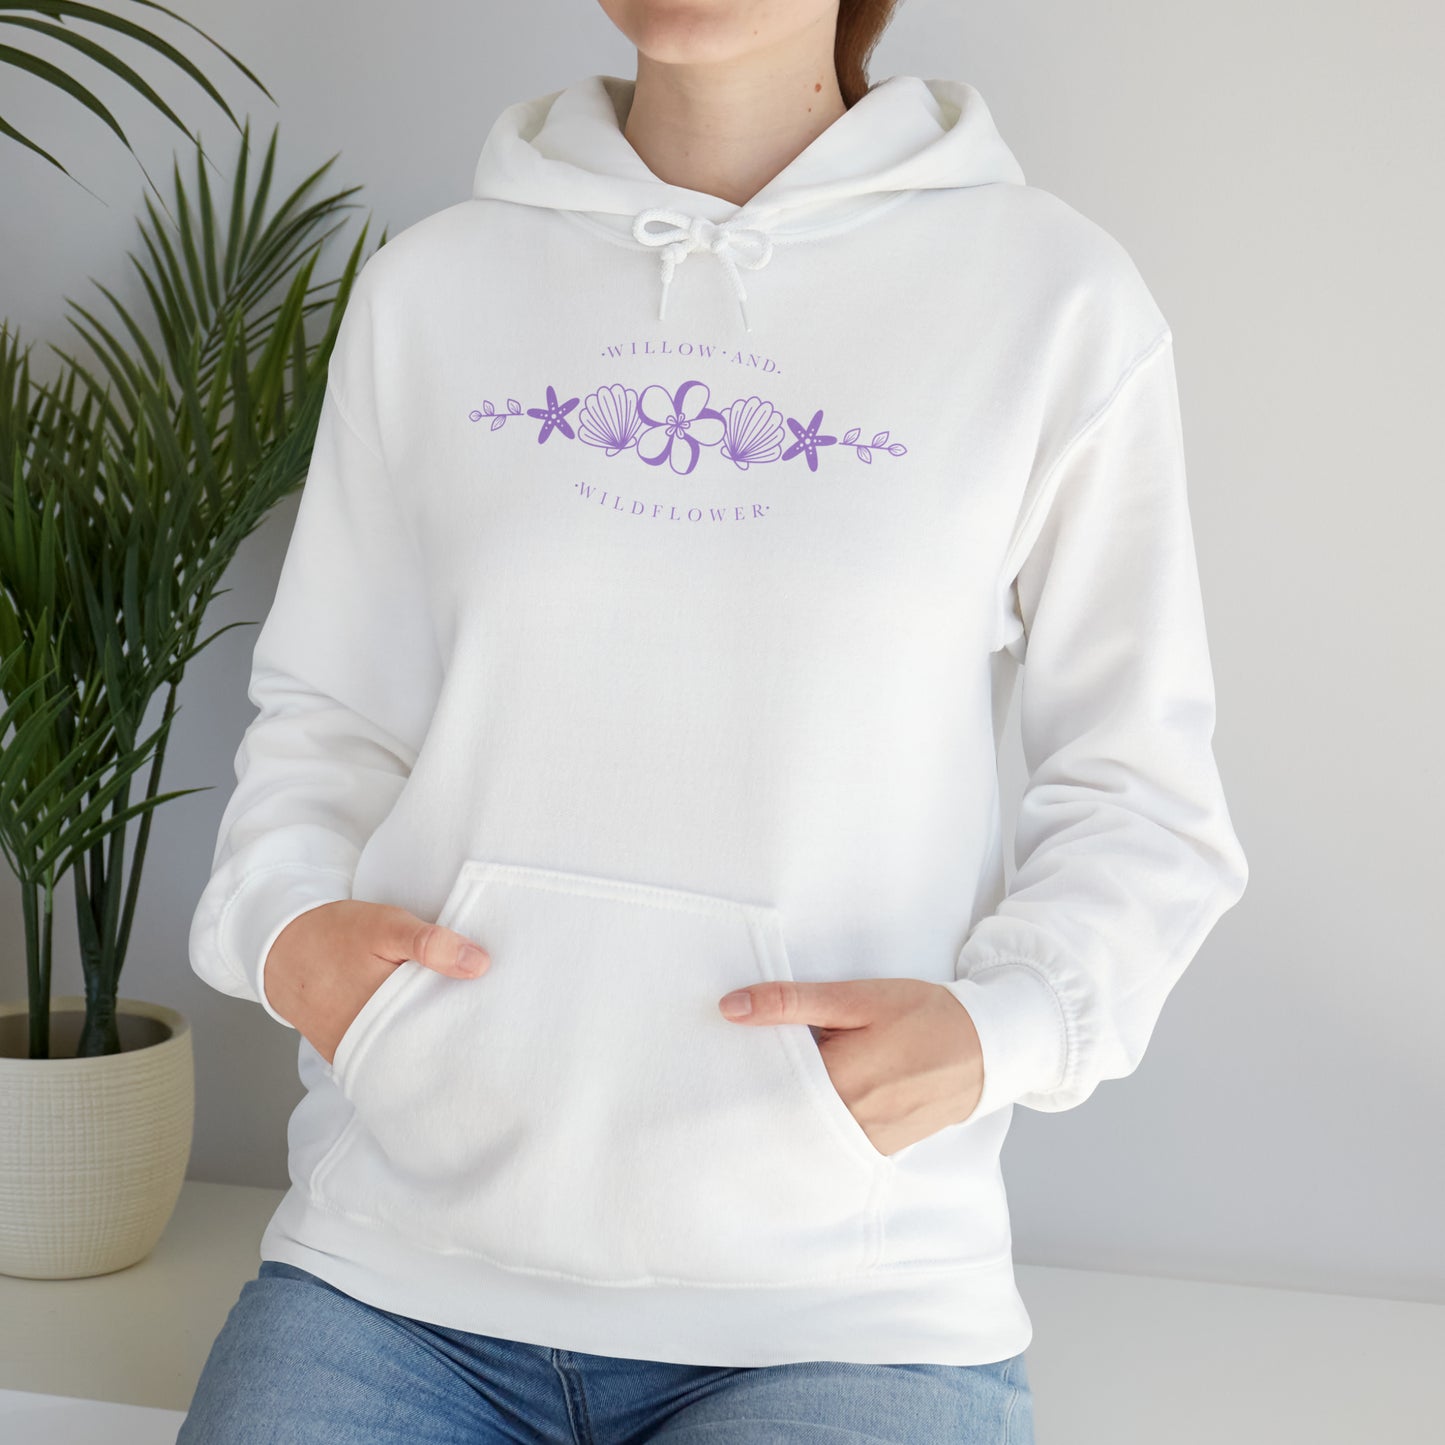 Sunsets - Hoodie - Lilac